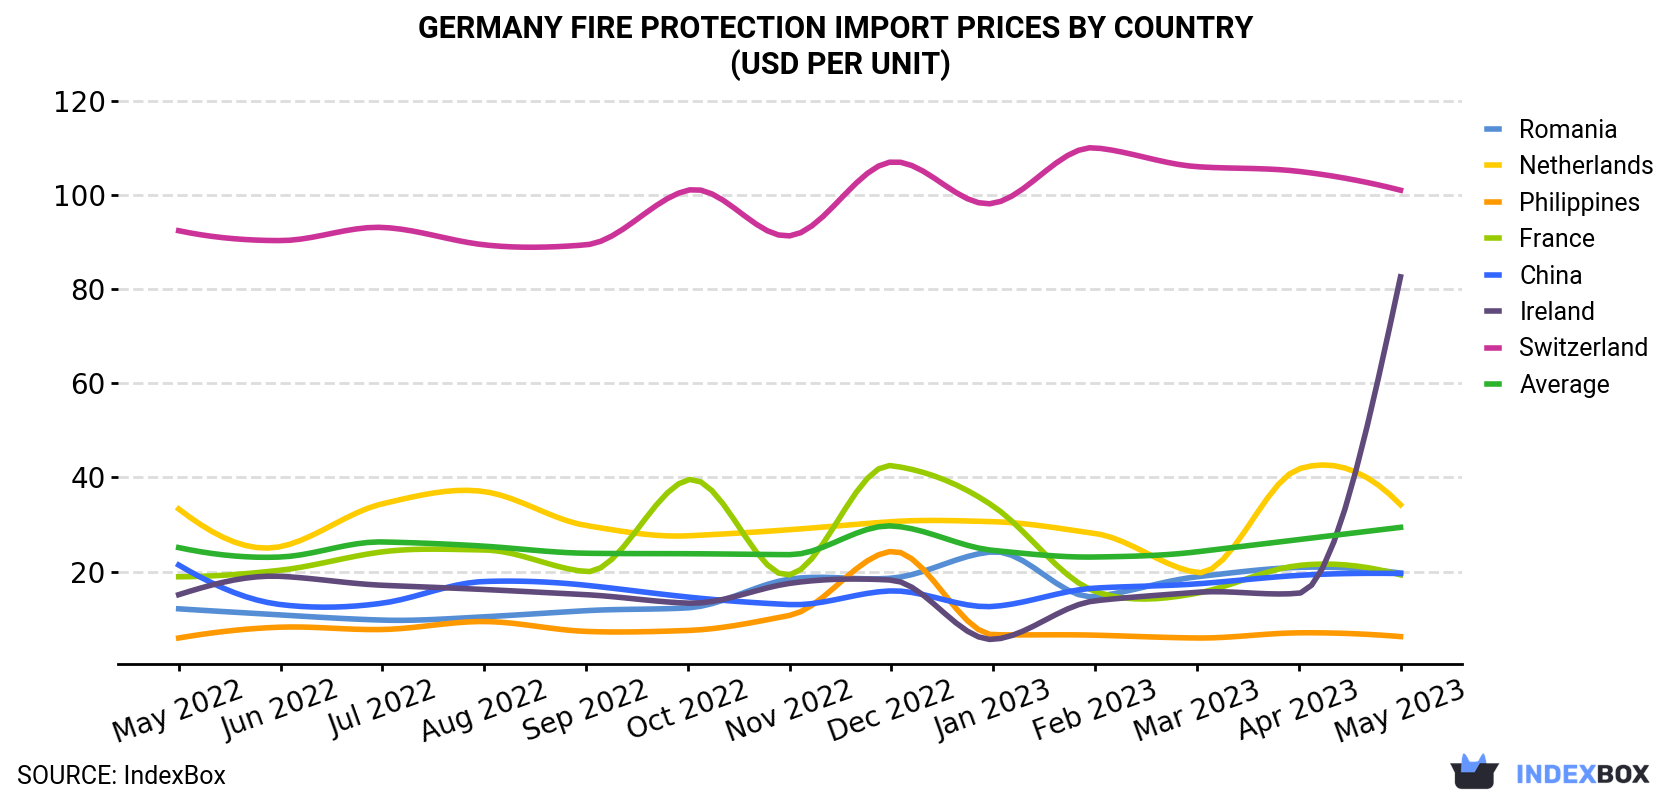 Germany Fire Protection Import Prices By Country (USD Per Unit)